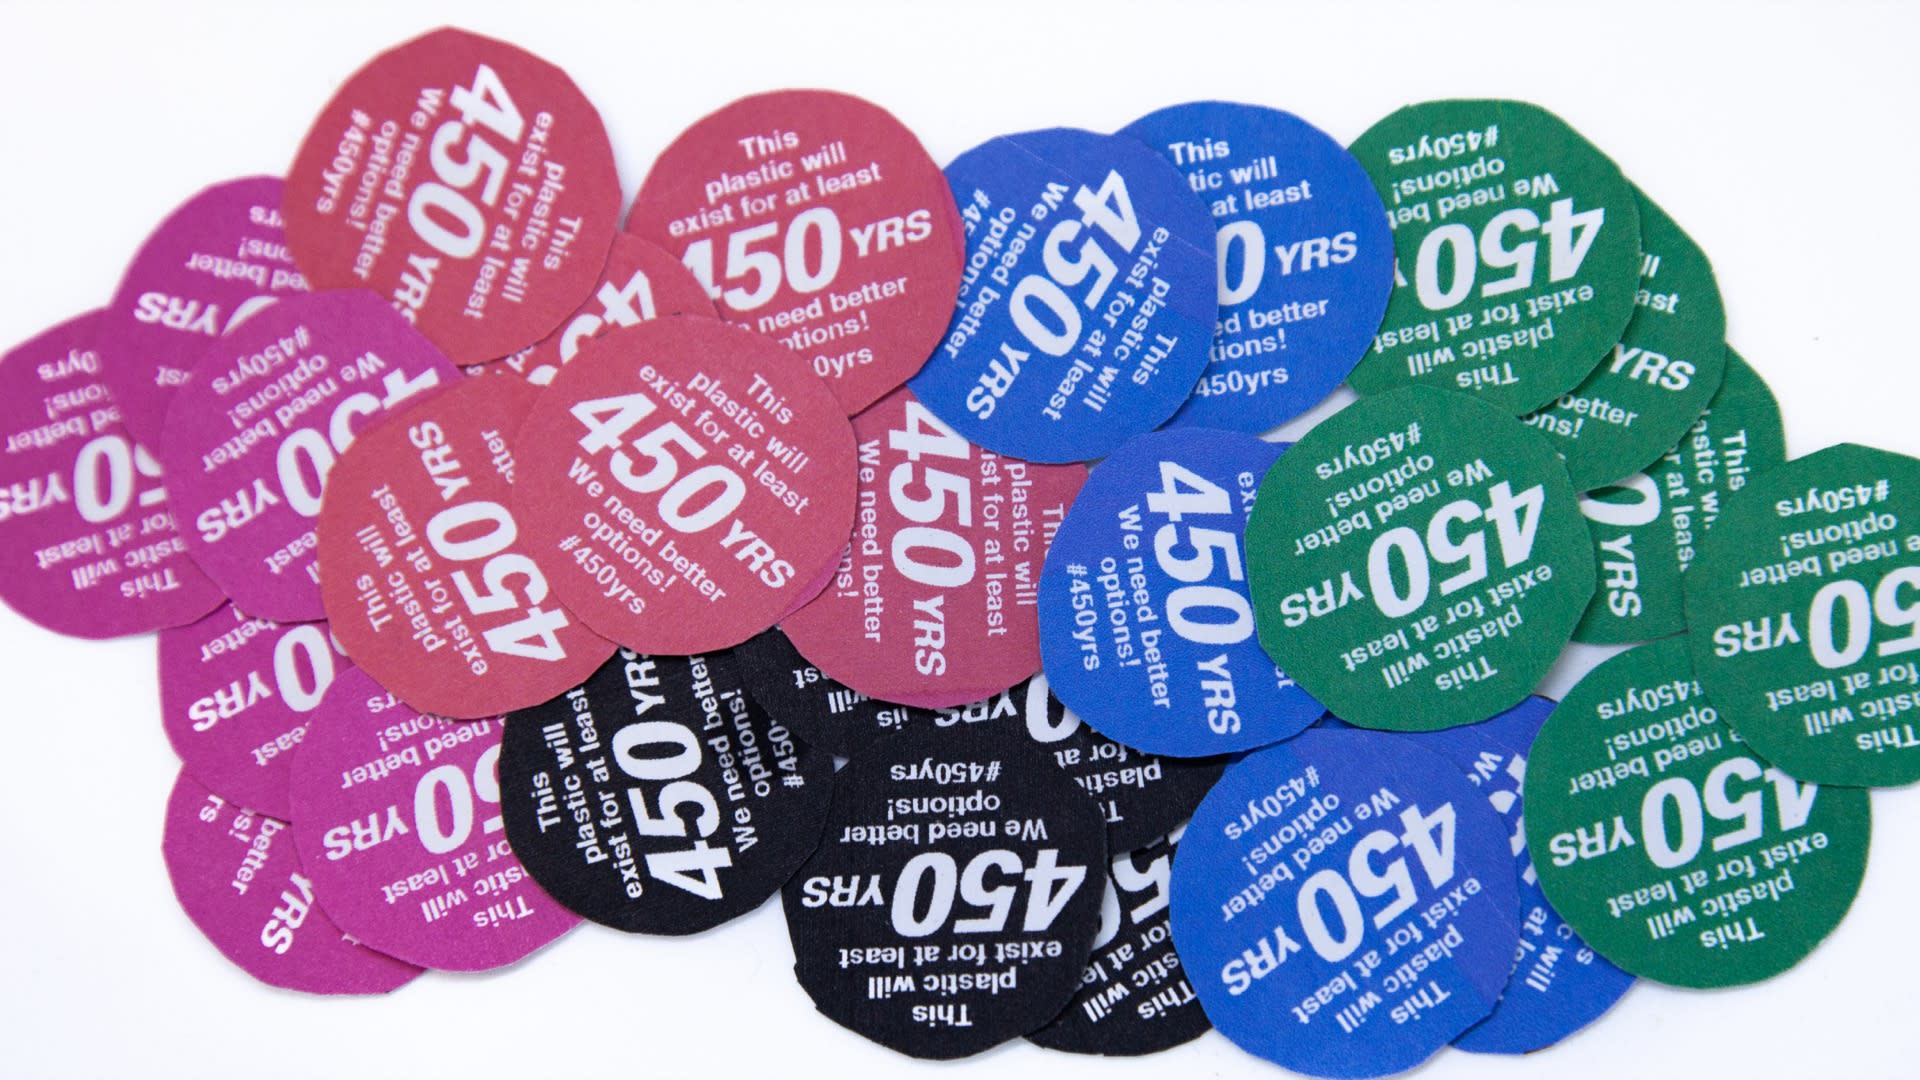 Thumbnail of Close-up photograph of approximately 30, hand-cut out, circular stickers–approximately 1.5 inches in diameter, all bunched up together on a white background. Stickers are either red, green, blue, magenta, black, or white and all say 'This plastic will exist for at least 450YRS. We need better options! #450yrs '